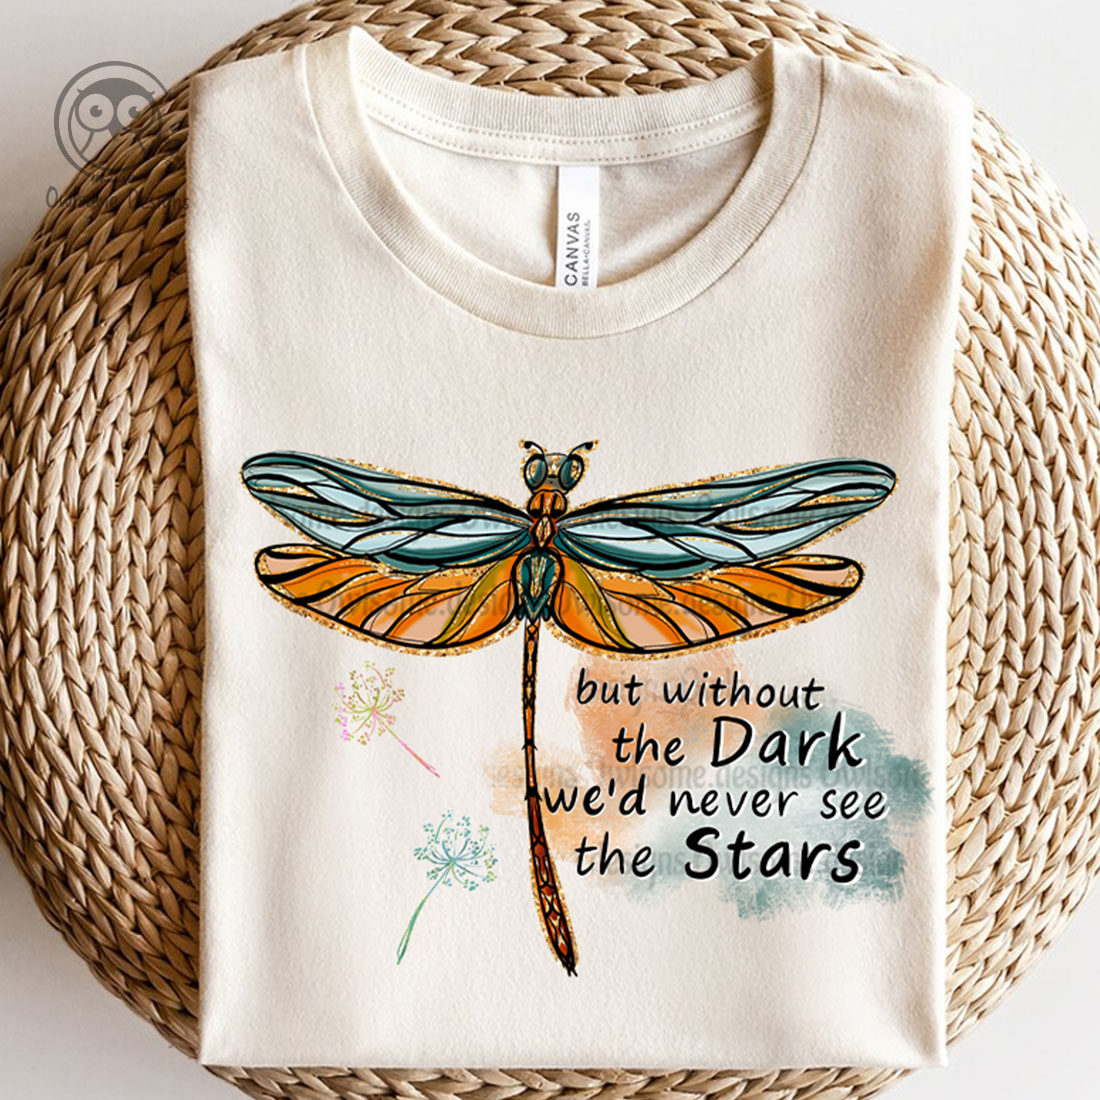 Image of a T-shirt with a gorgeous dragonfly print and slogan.